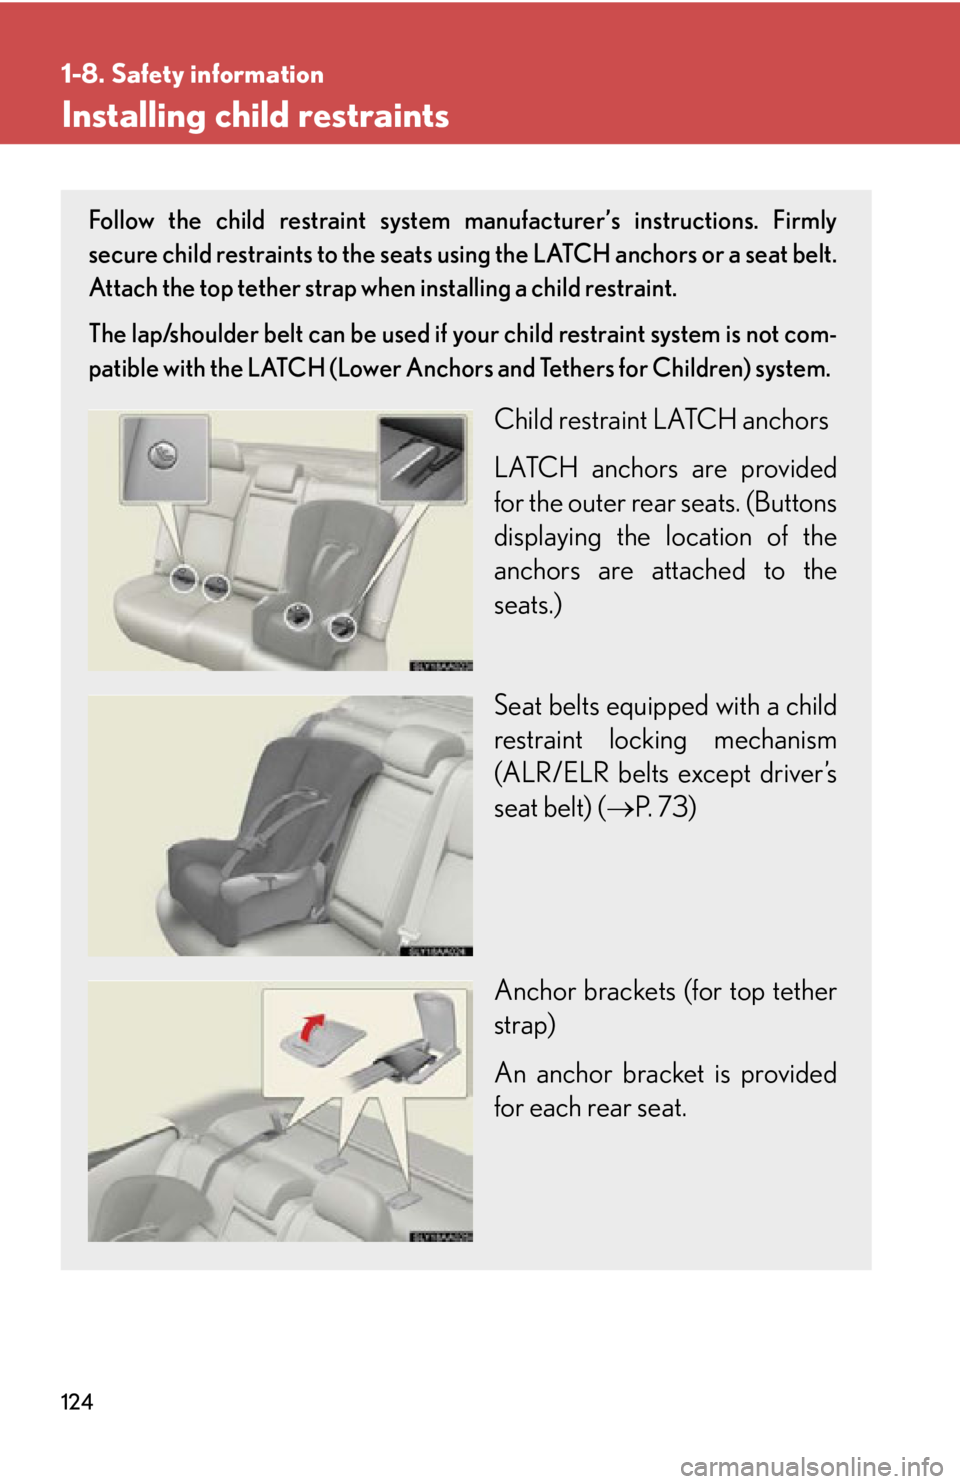 Lexus HS250h 2010  Do-it-yourself maintenance / LEXUS 2010 HS250H OWNERS MANUAL (OM75006U) 124
1-8. Safety information
Installing child restraints
Follow the child restraint system manufacturer’s instructions. Firmly 
secure child restraints to the seats using the LATCH anchors or a seat 